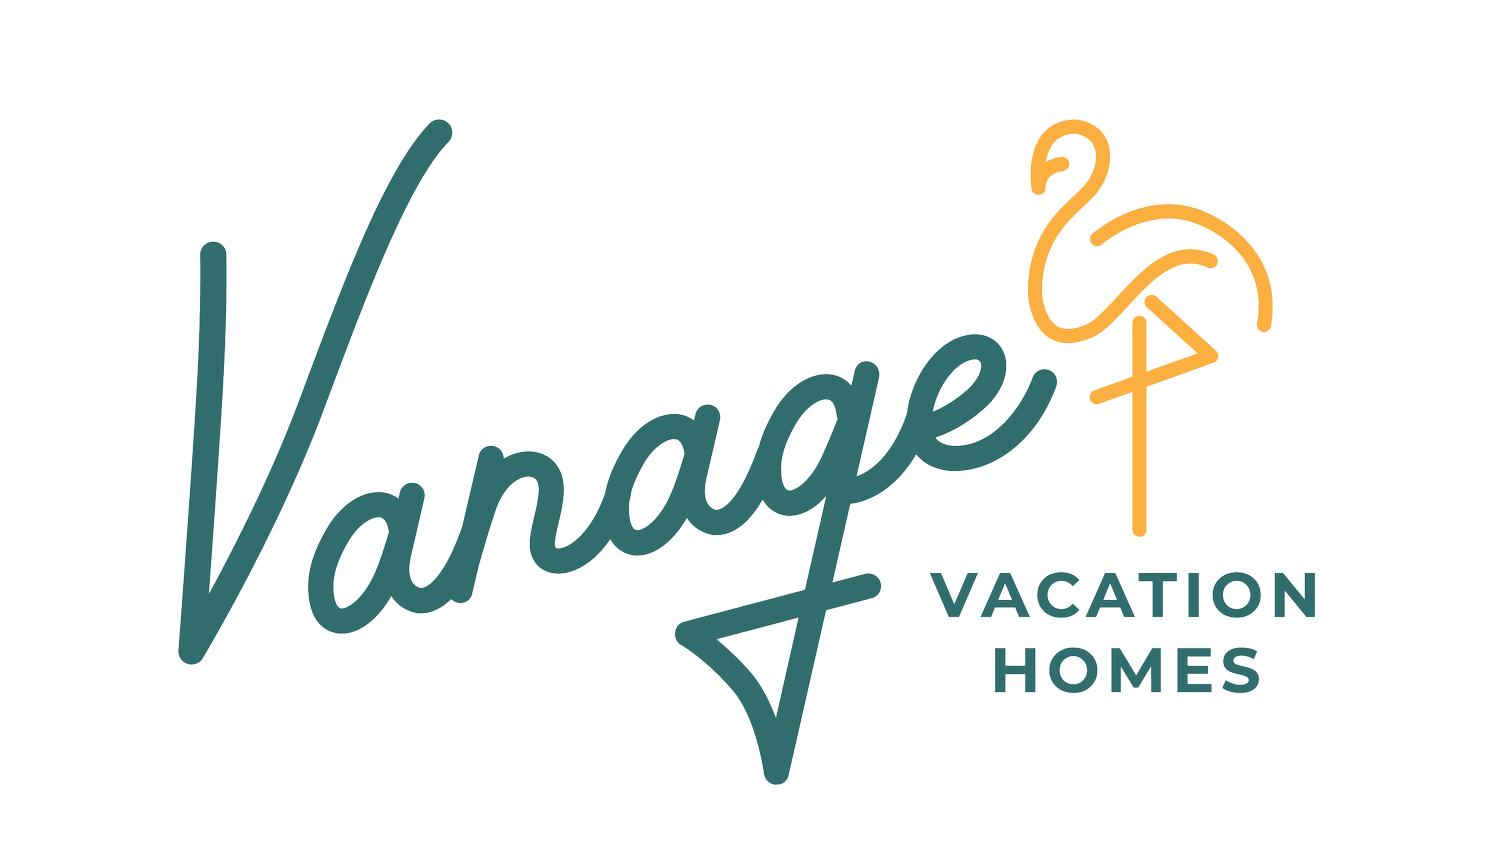 Vanage Vacation Homes